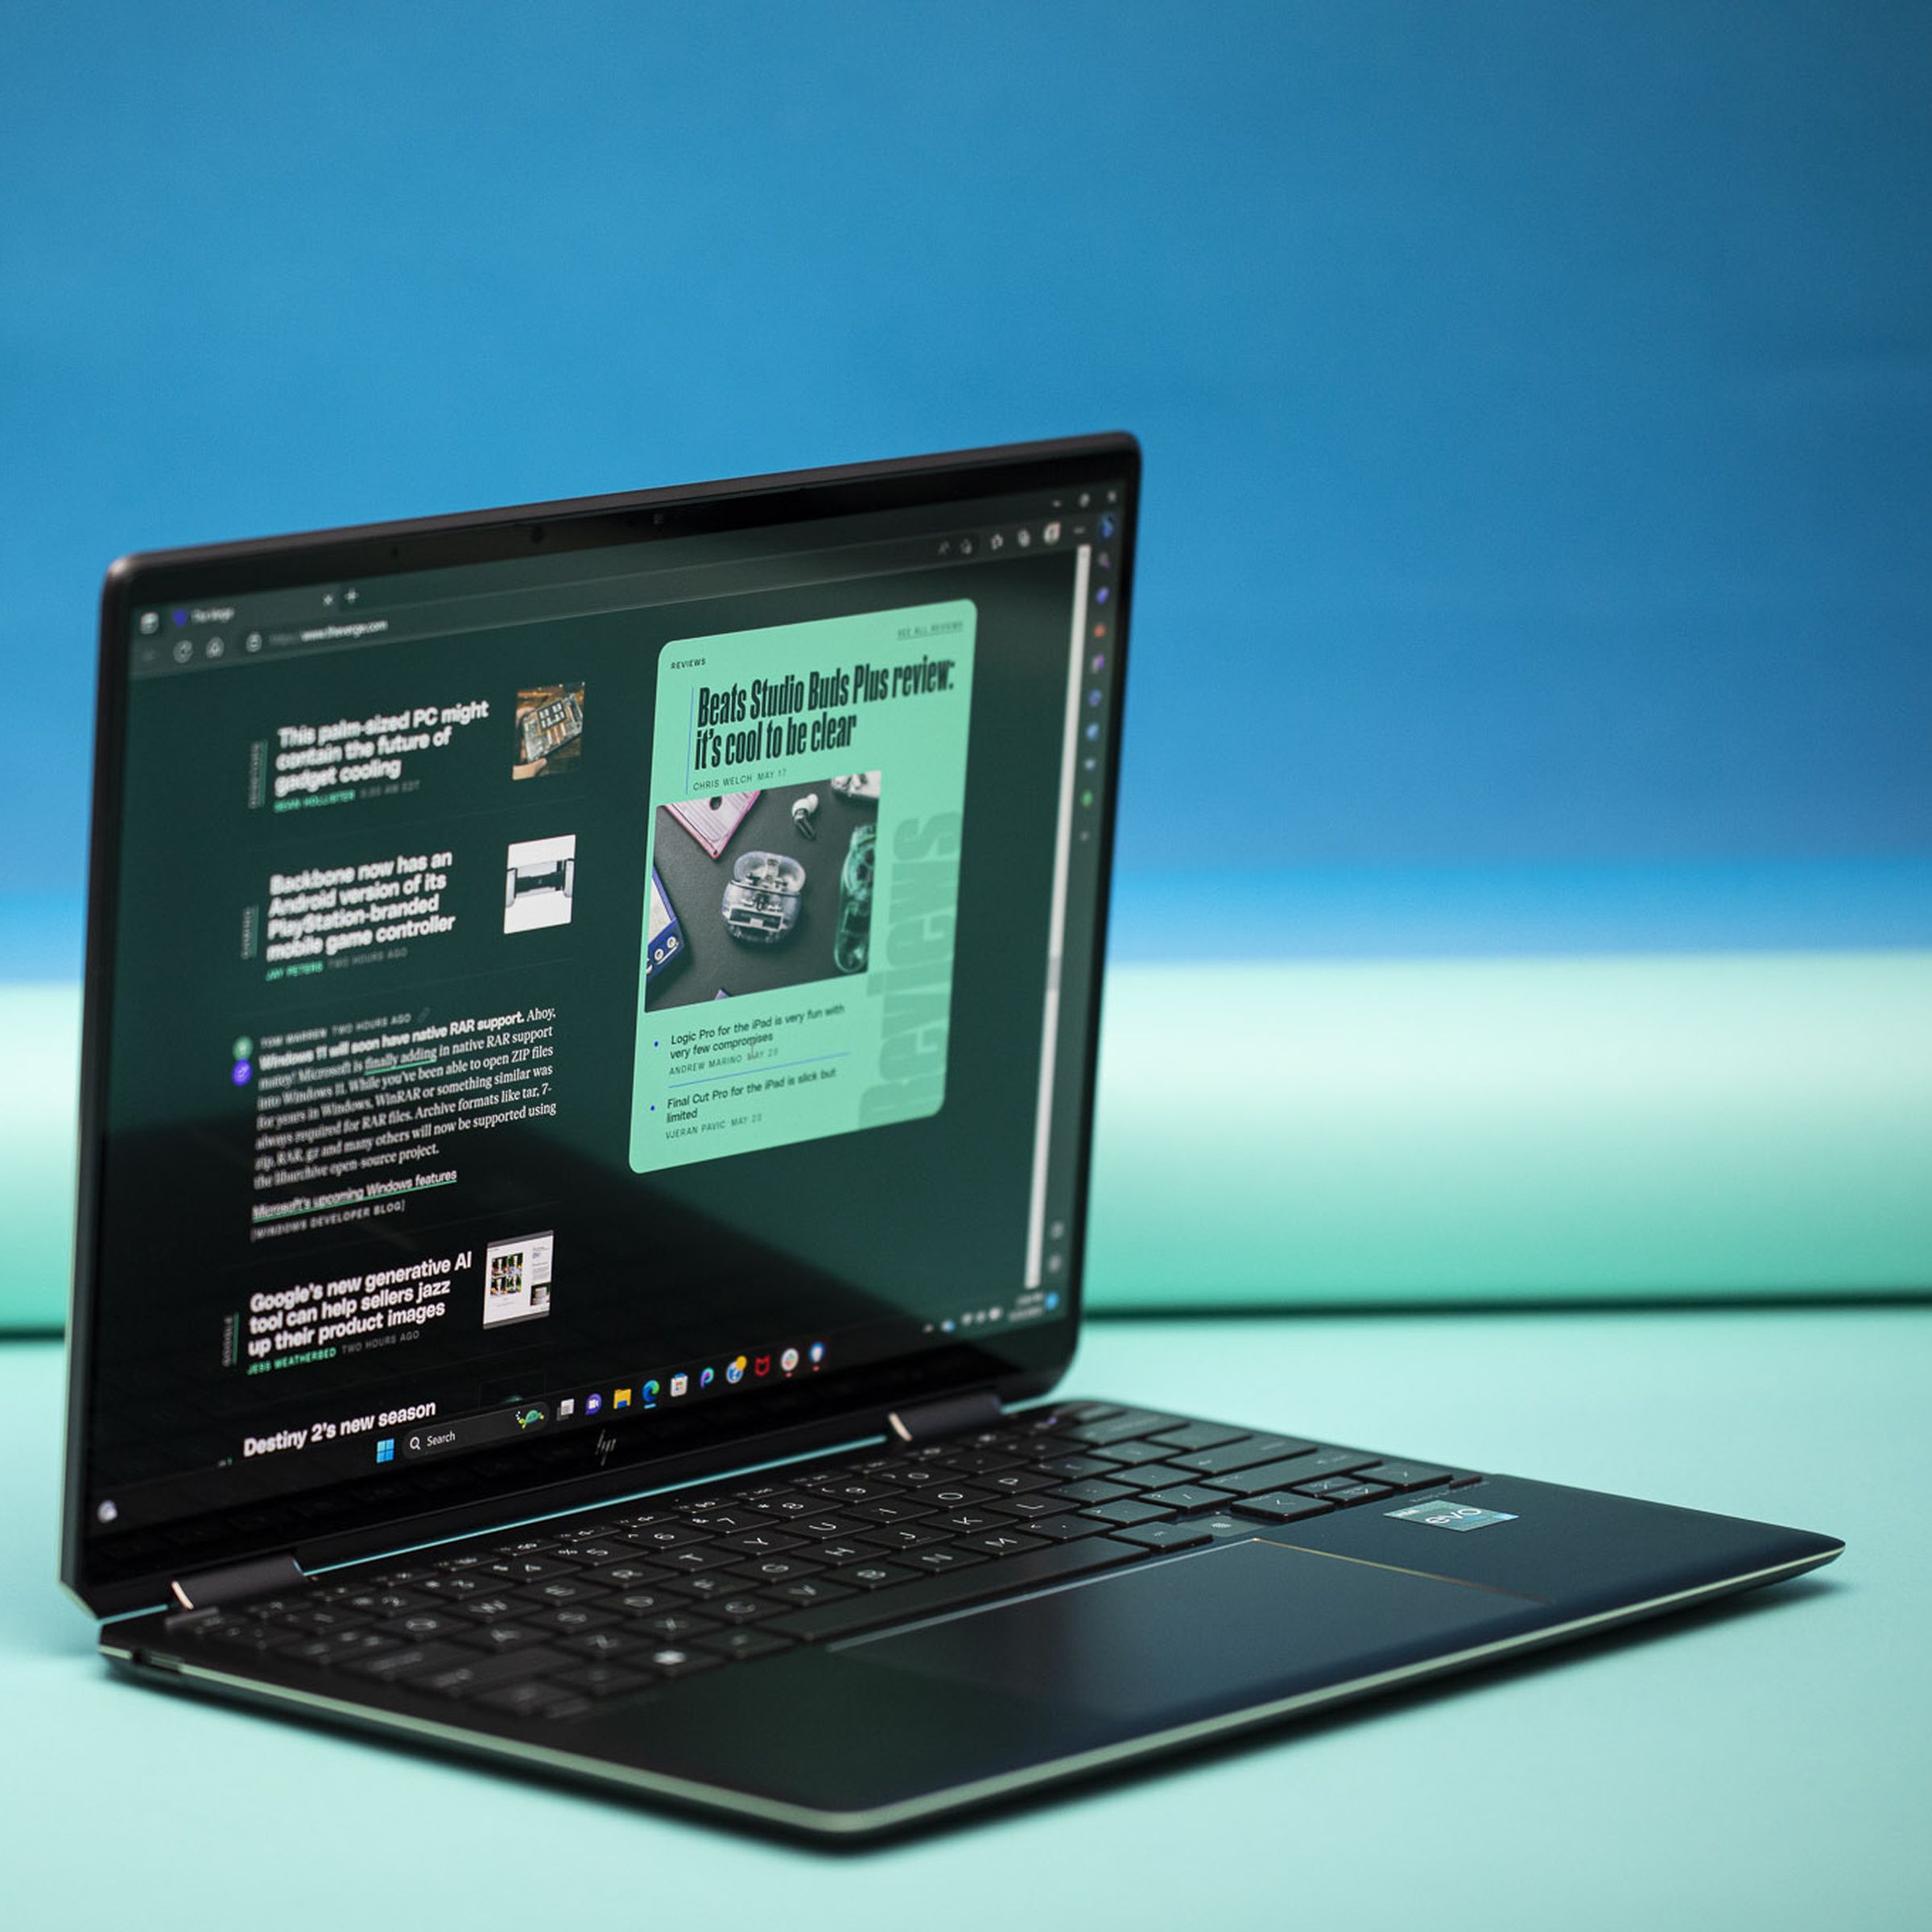 The HP Spectre x360 displaying The Verge homepage.